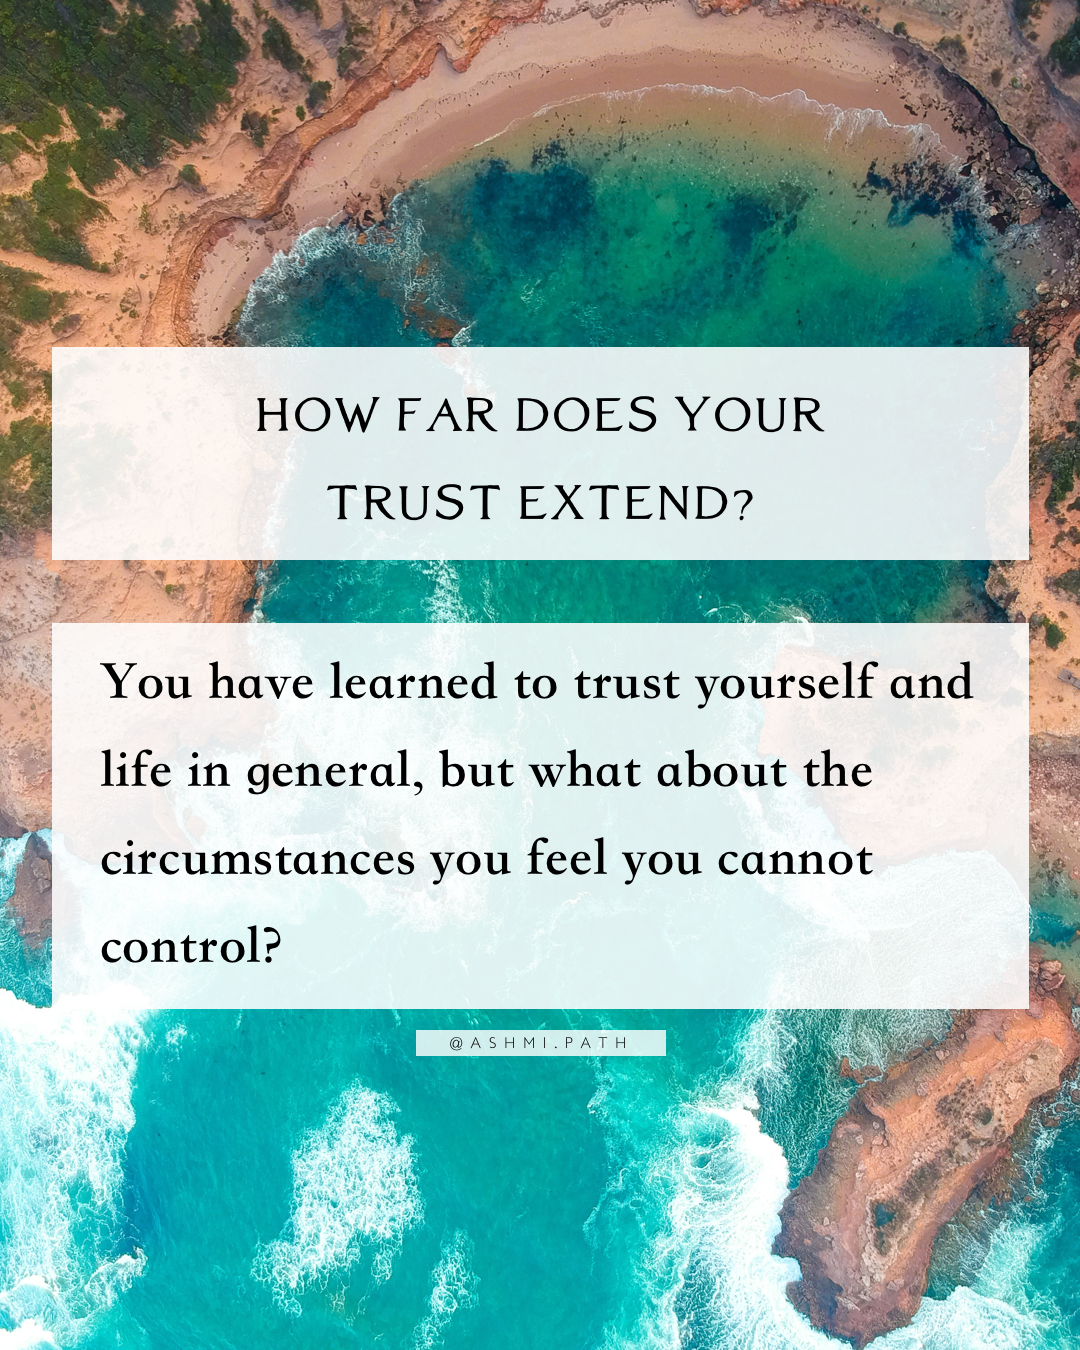 How Far Does Your Trust Extend?